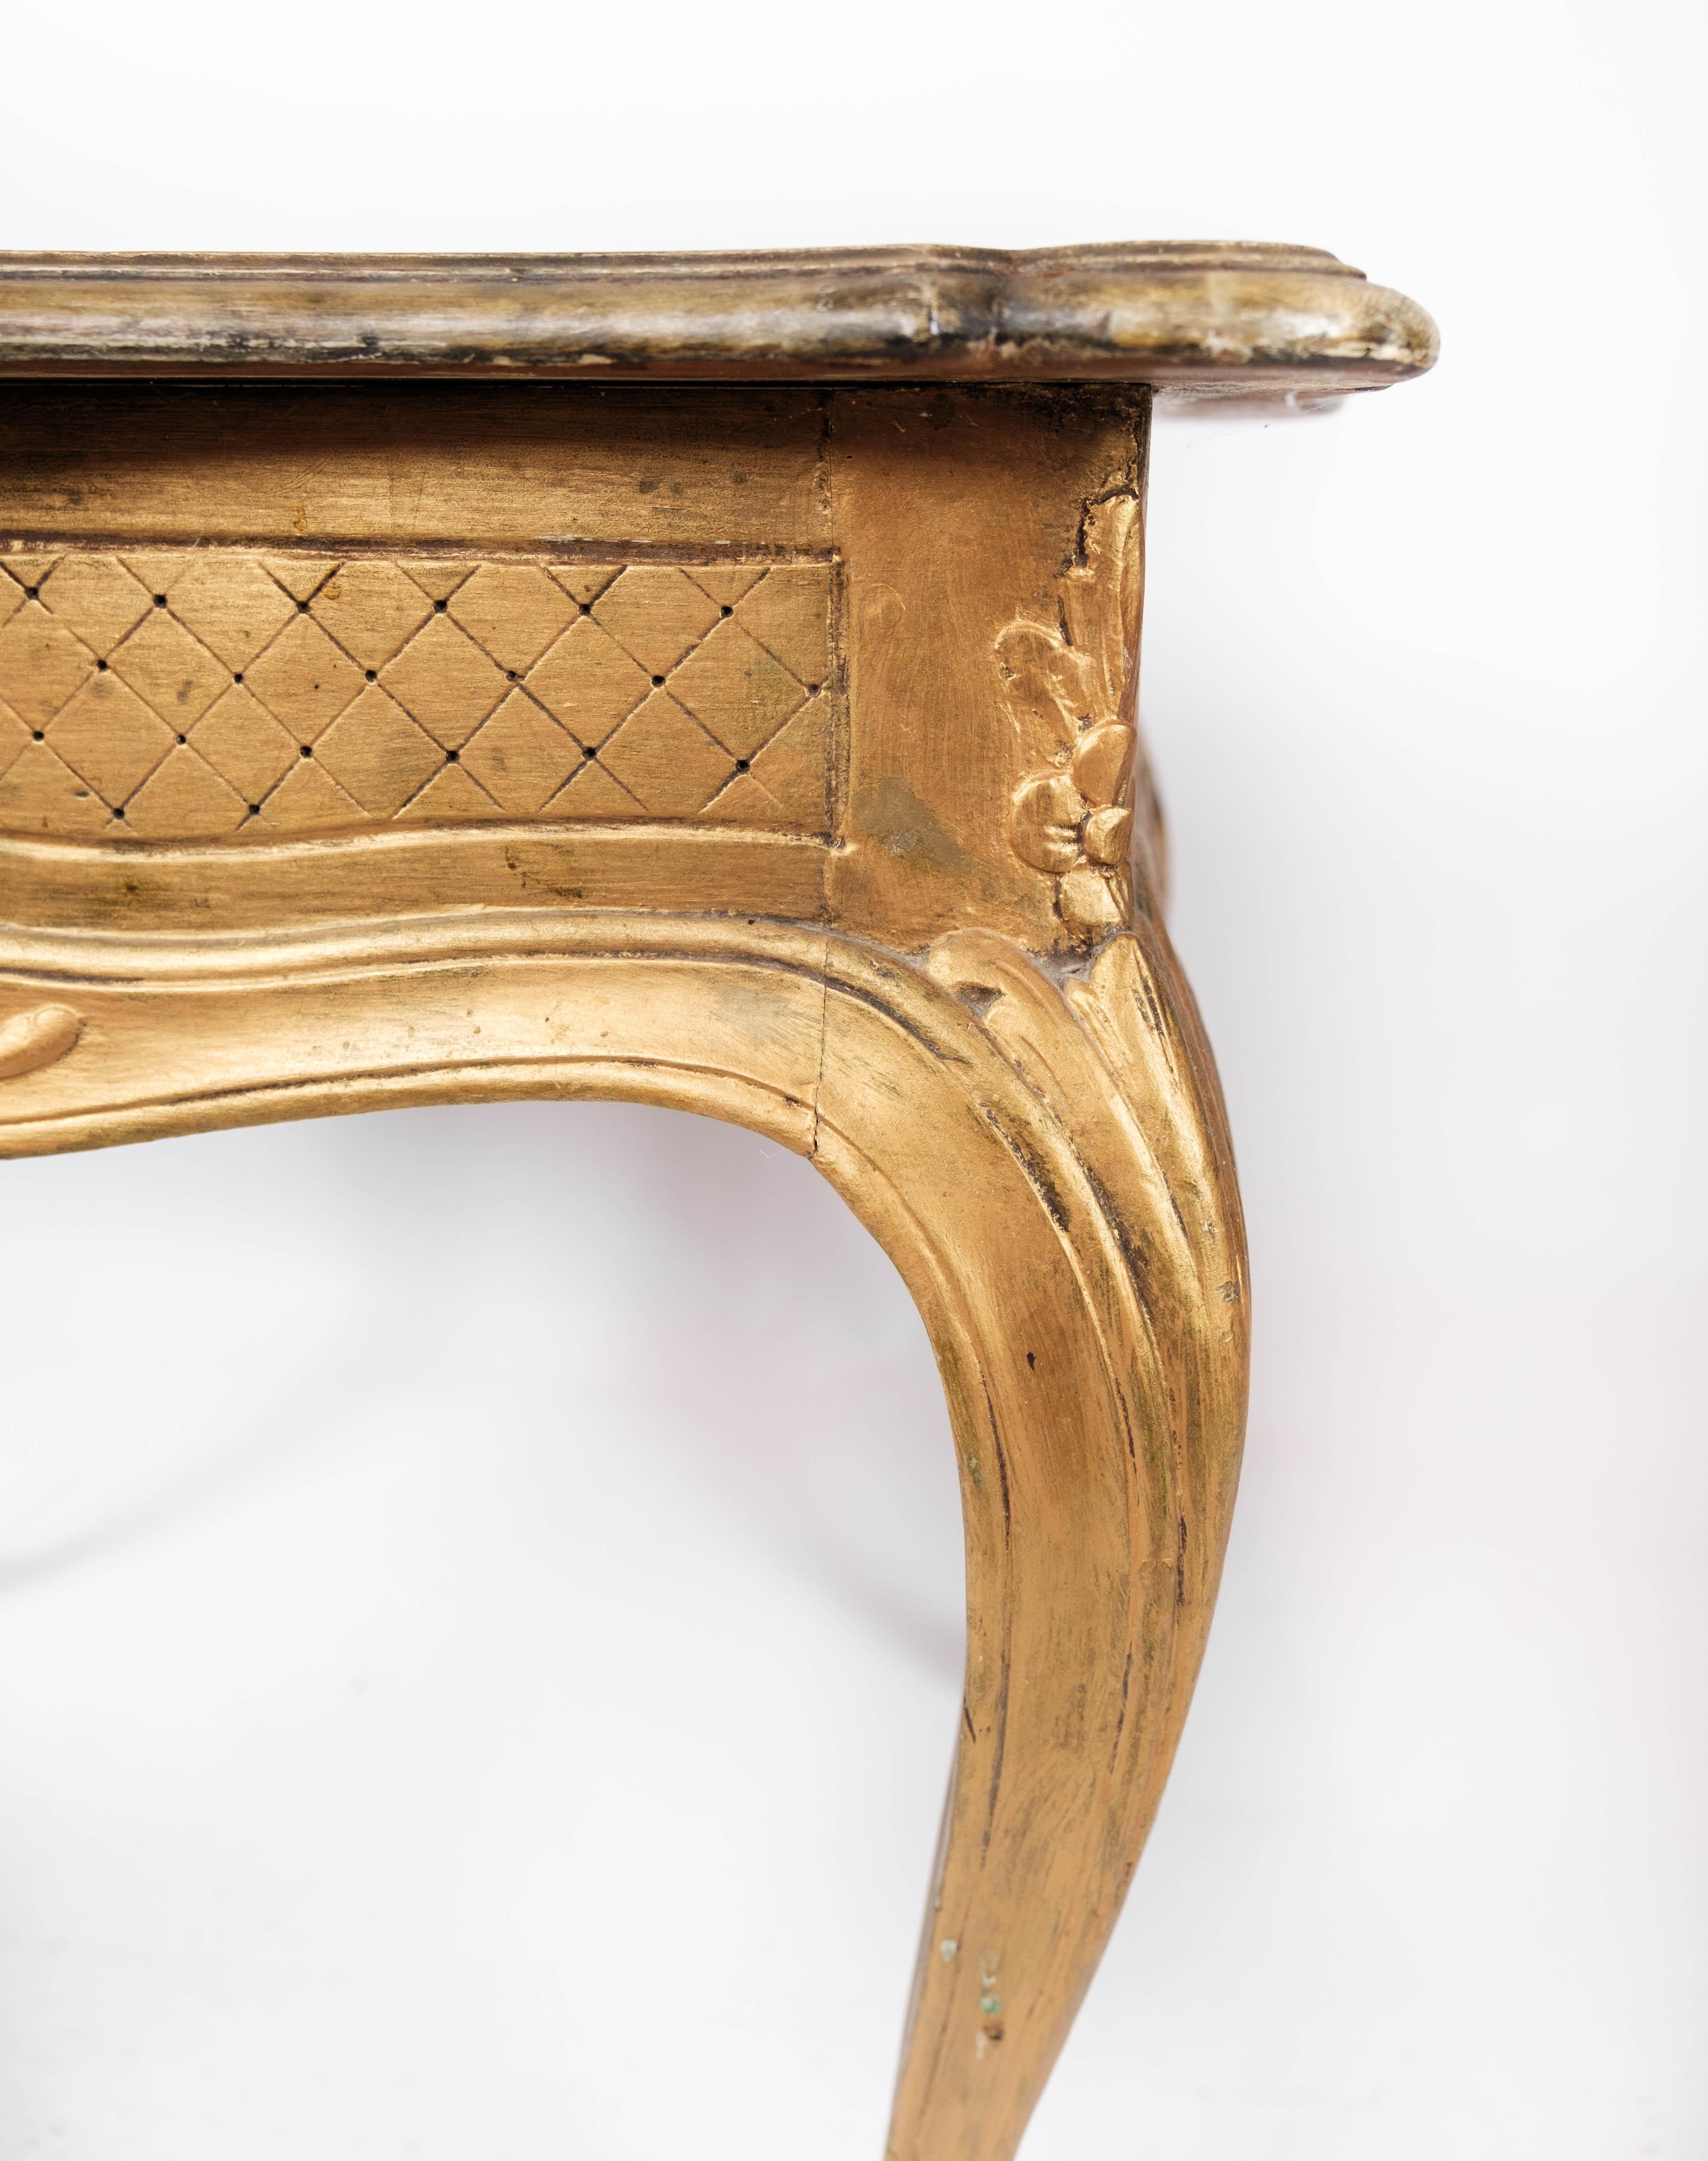 Mid-19th Century Rococo Revival Side Table with Marbled Tabletop and Frame of Gilded Wood, 1860s For Sale